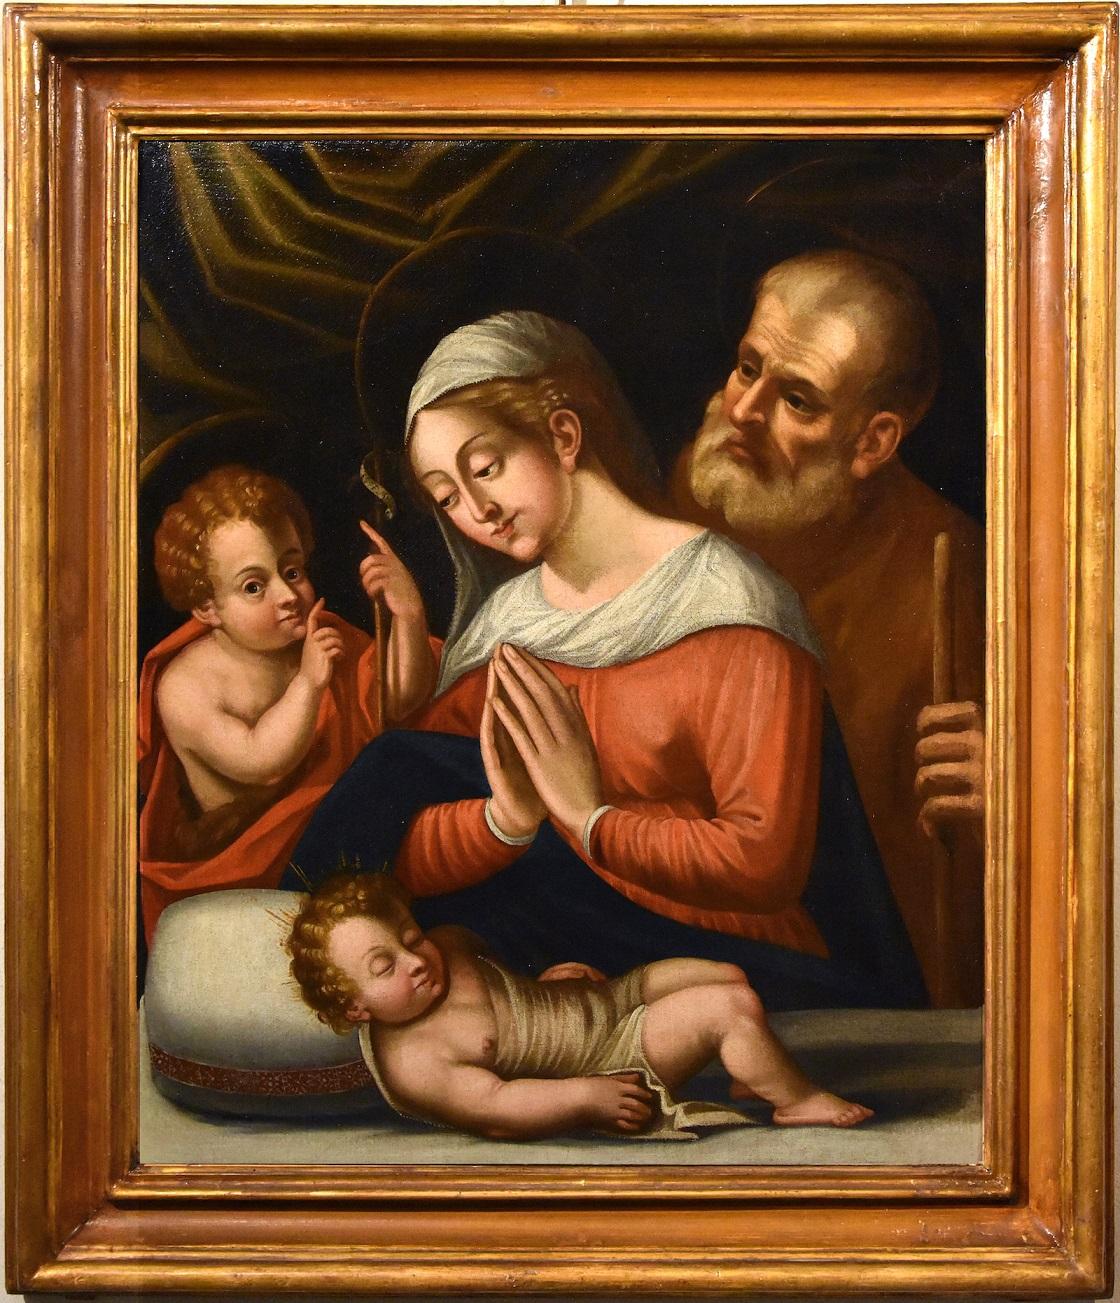 Giovanni Battista Ramenghi, known as Bagnacavallo (Bologna, 1521 - 1601) Portrait Painting - Holy Family Ramenghi Paint Oil on canvas Old master 17th Century Religious Art